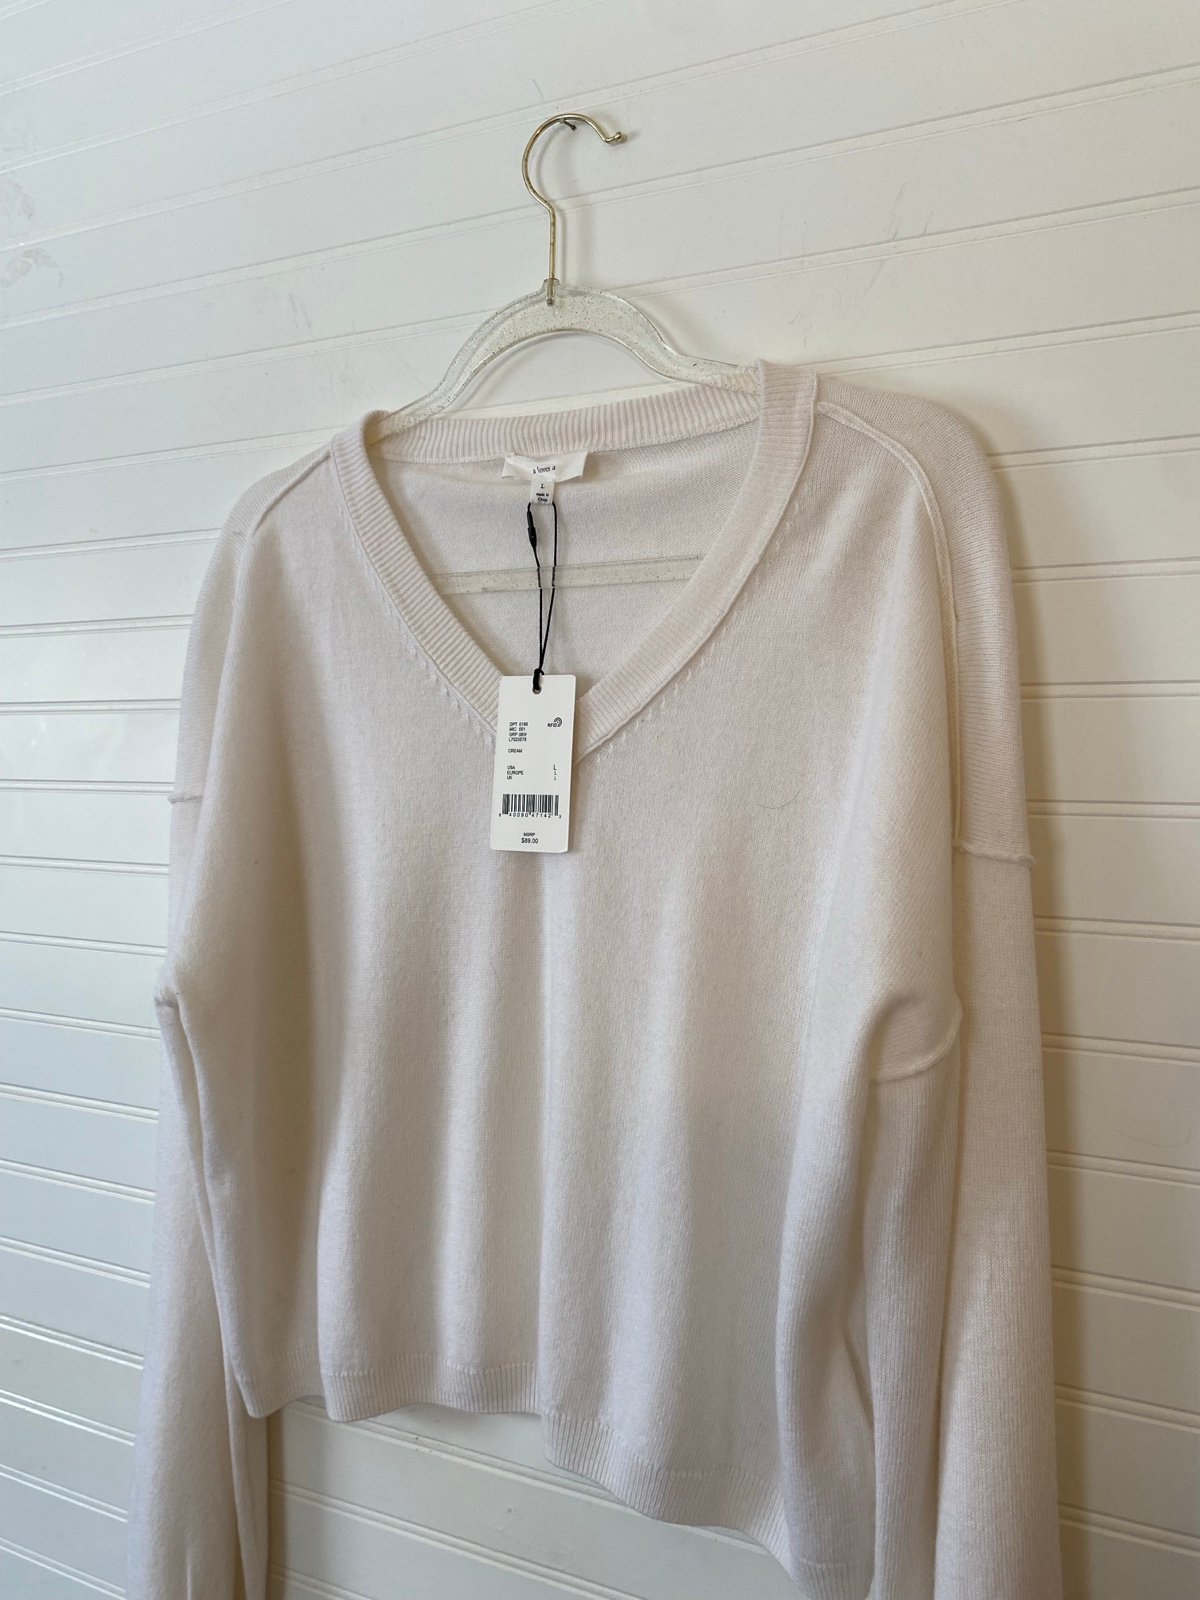 Personality a loves a Cashmere Merino Wool Mix Oatmilk Pullover Sweater om6vhqXDw Hot Sale